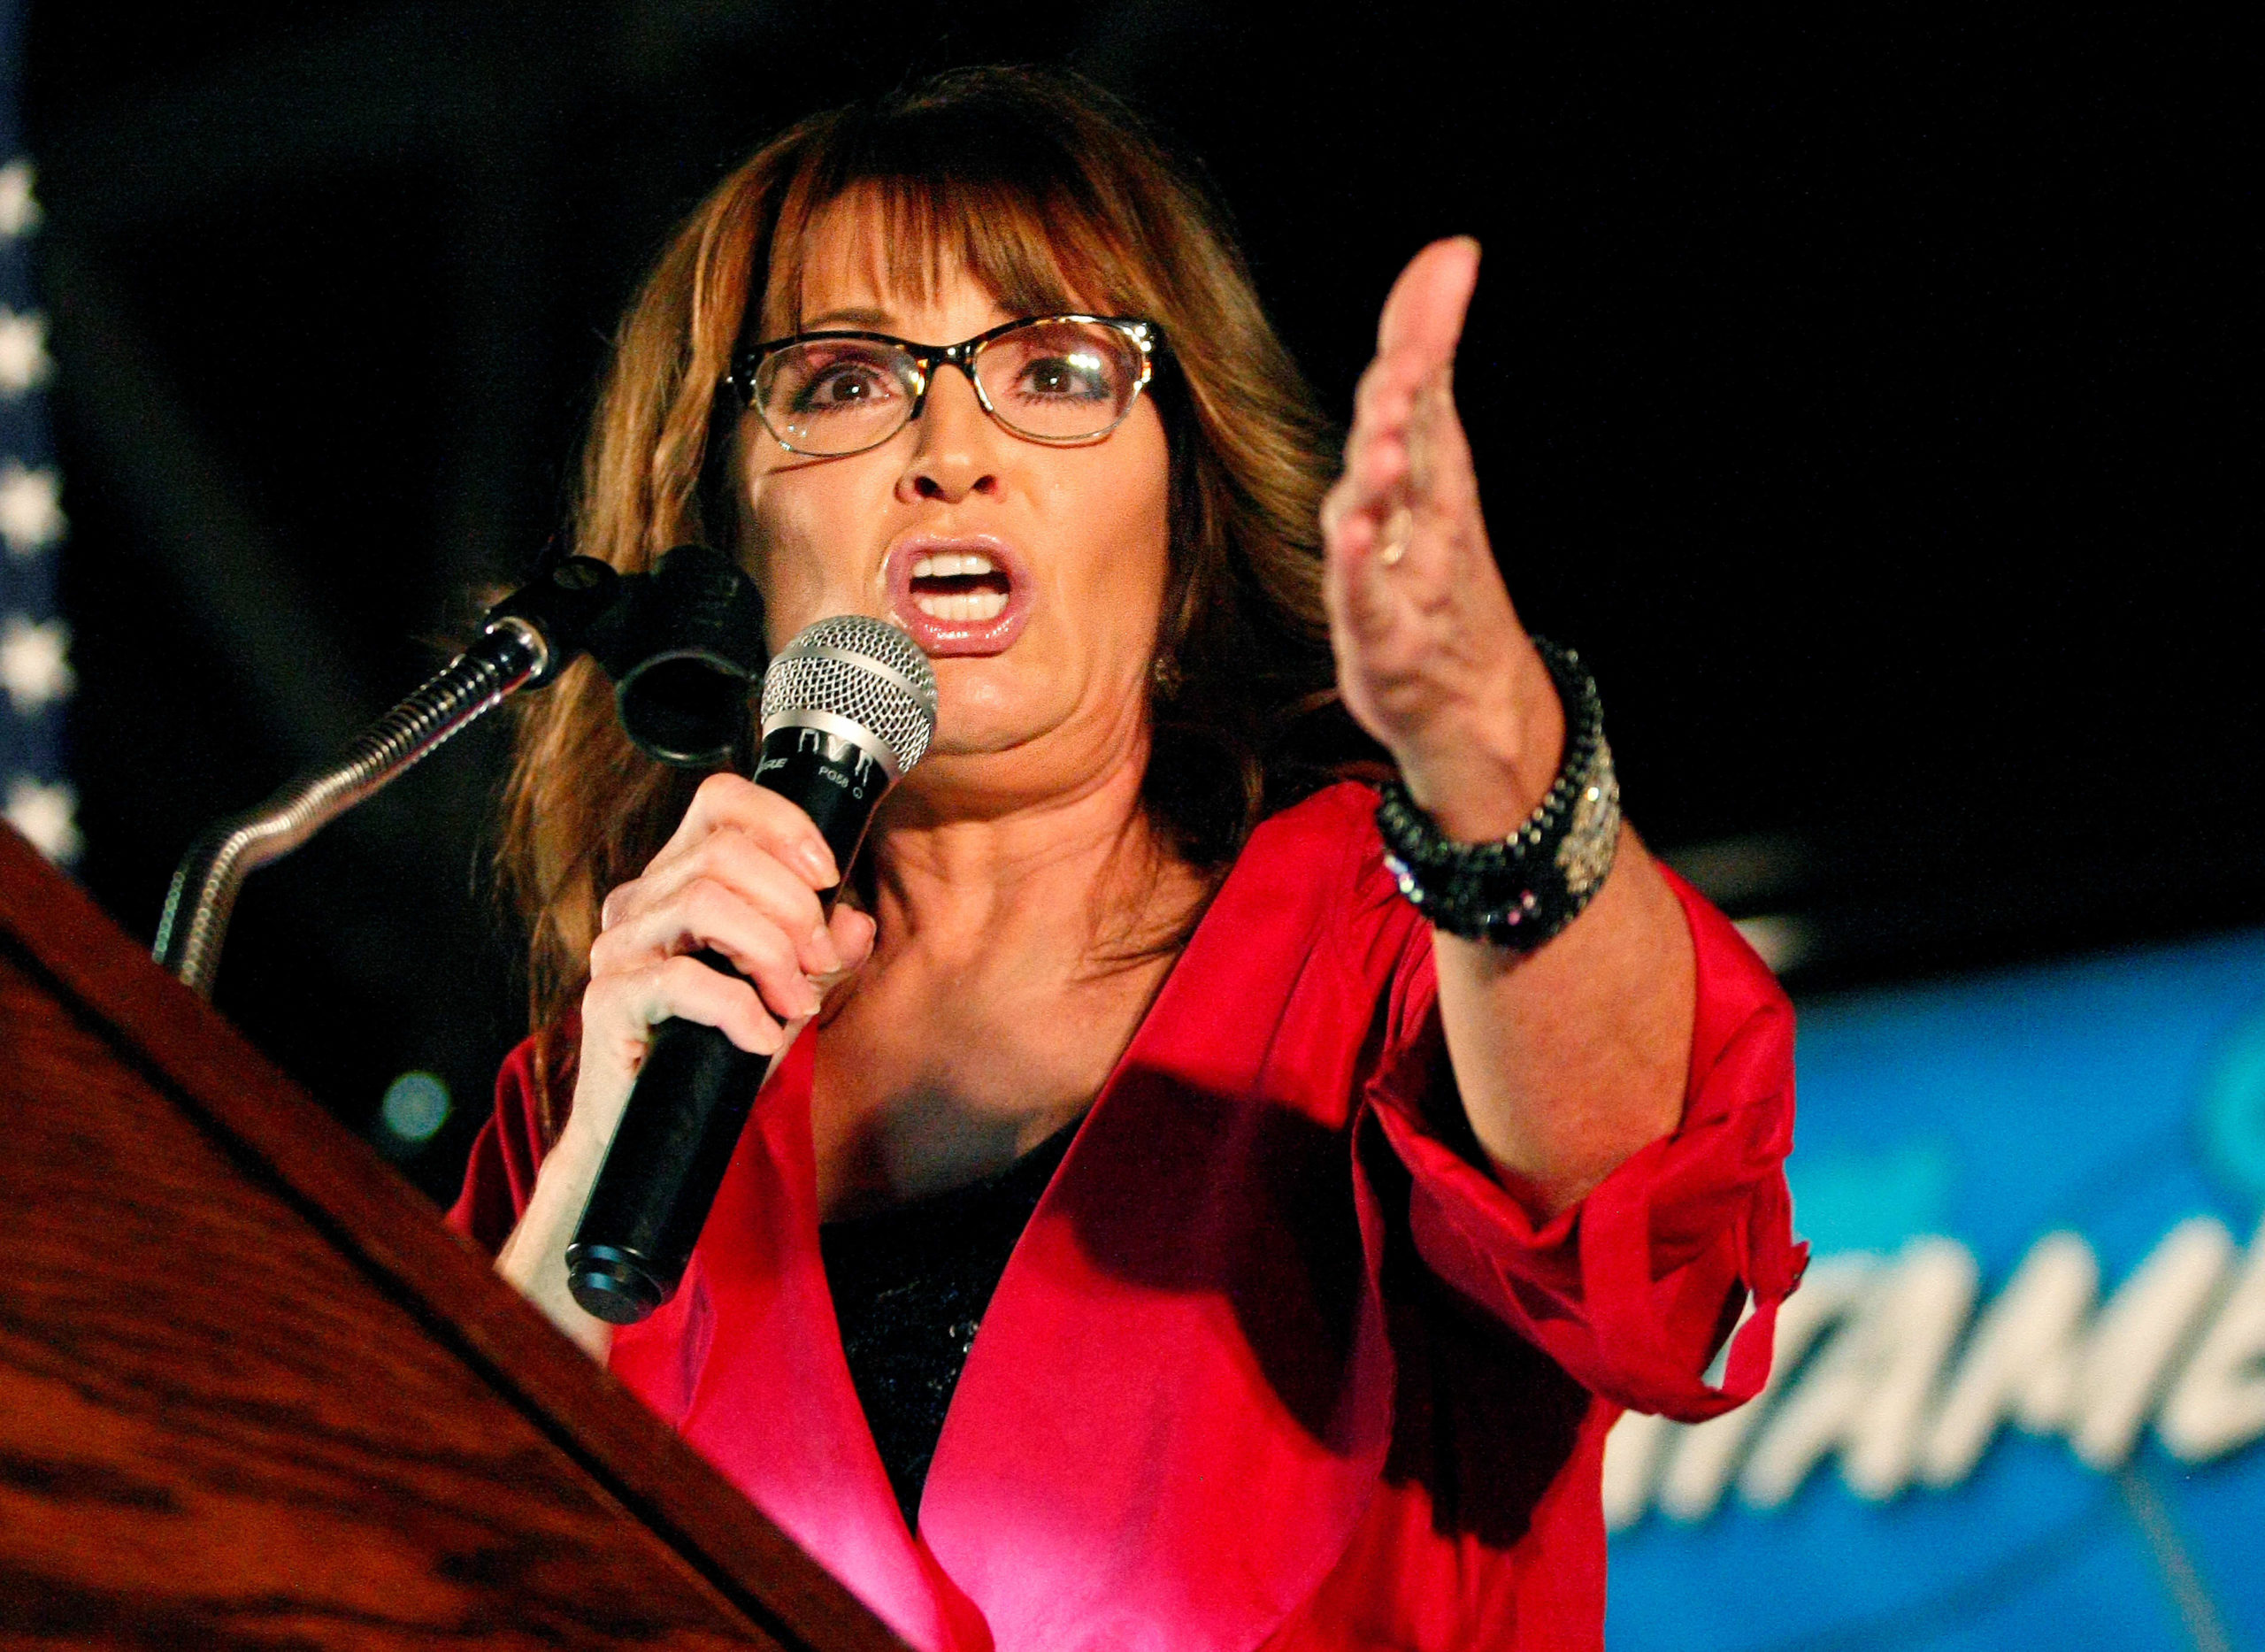 Unvaccinated Sarah Palin positive for Covid before NY Times defamation trial